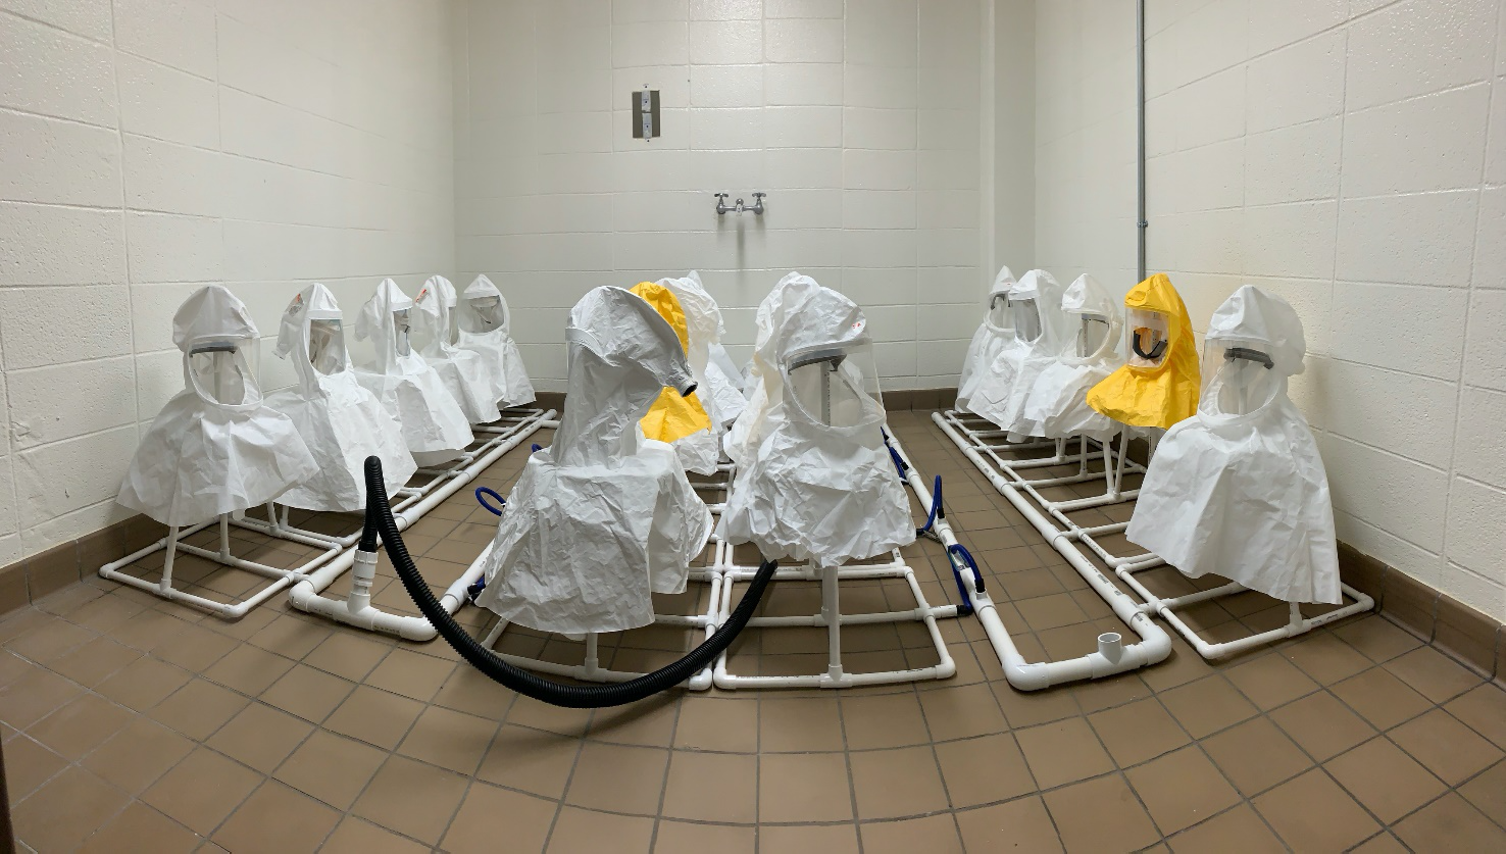 20 PAPR hoods can be simultaneously decontaminated with several PHODDS devices connected together.